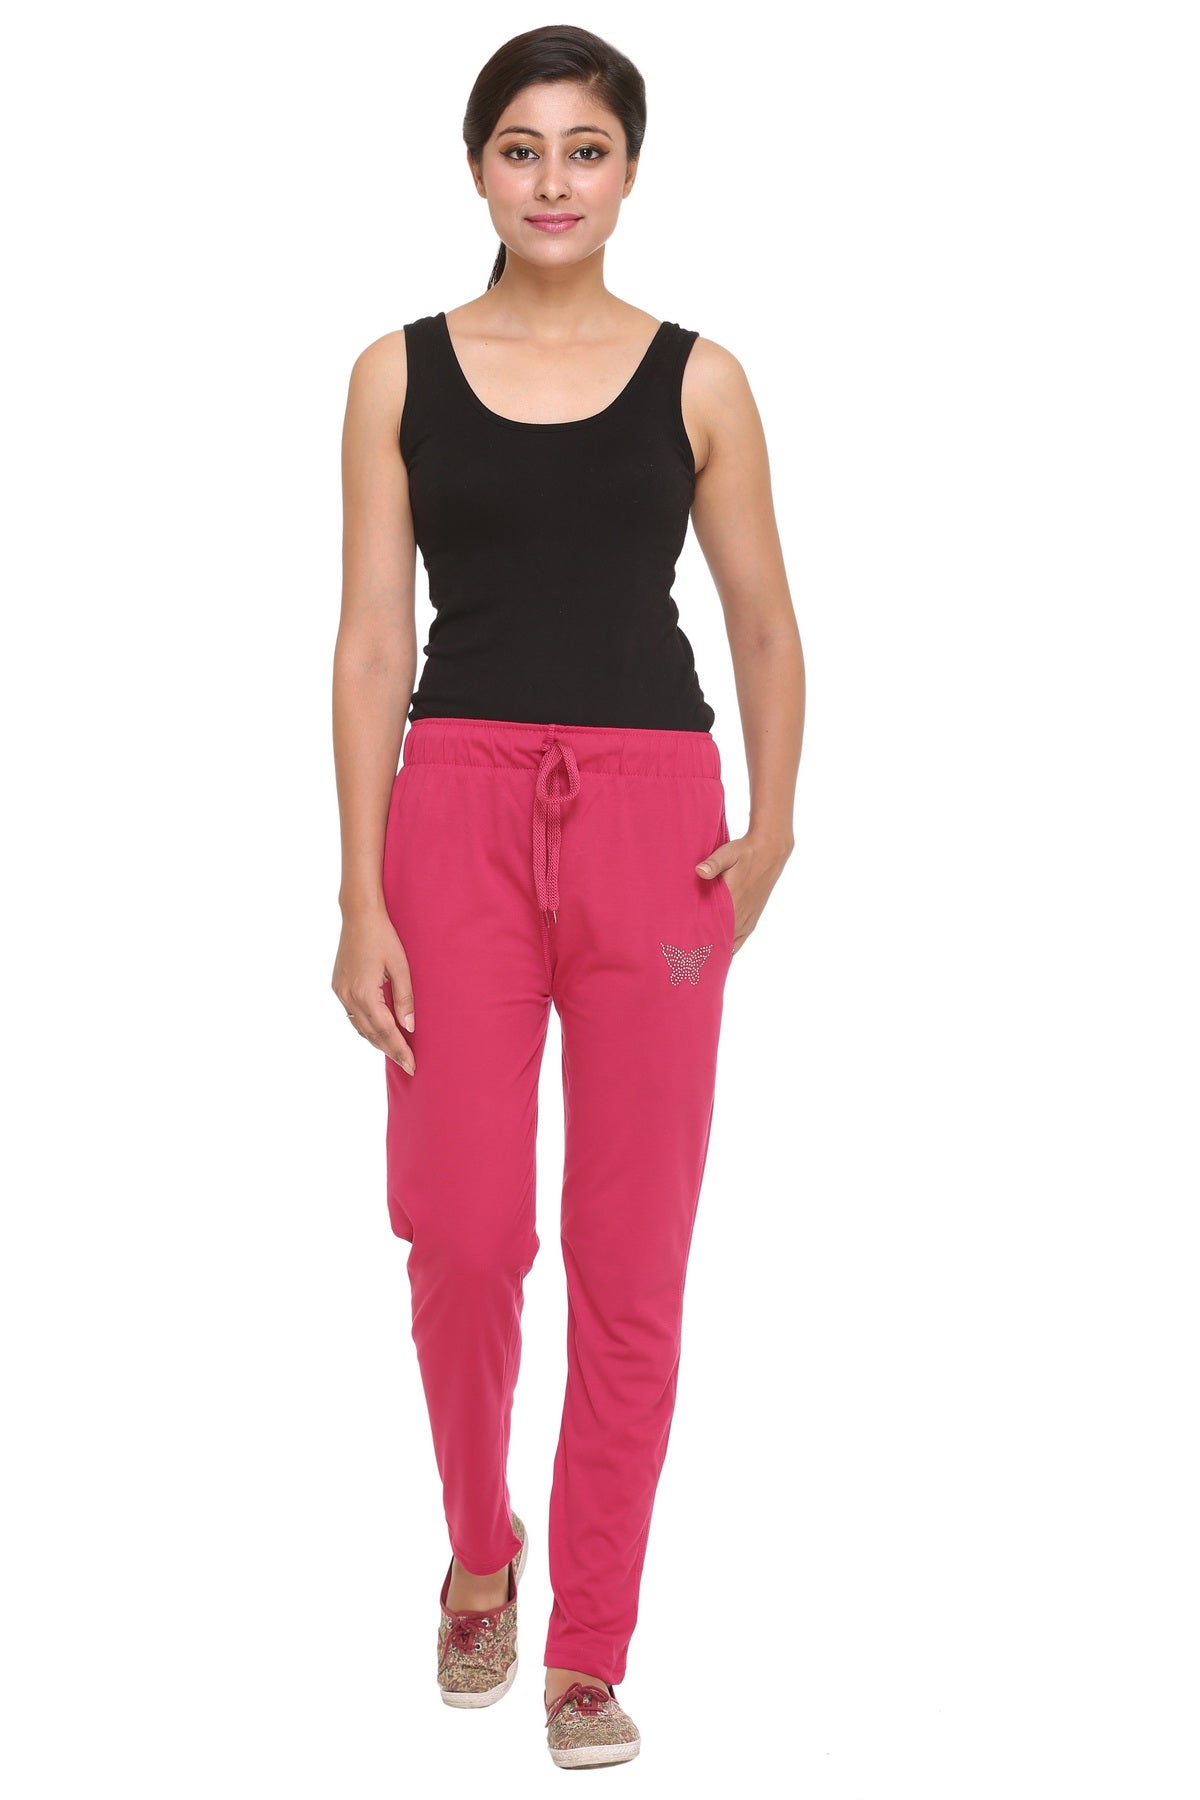 Stylish Cotton Plus Size Track Pants For Women (Pack of 2) At Best Prices